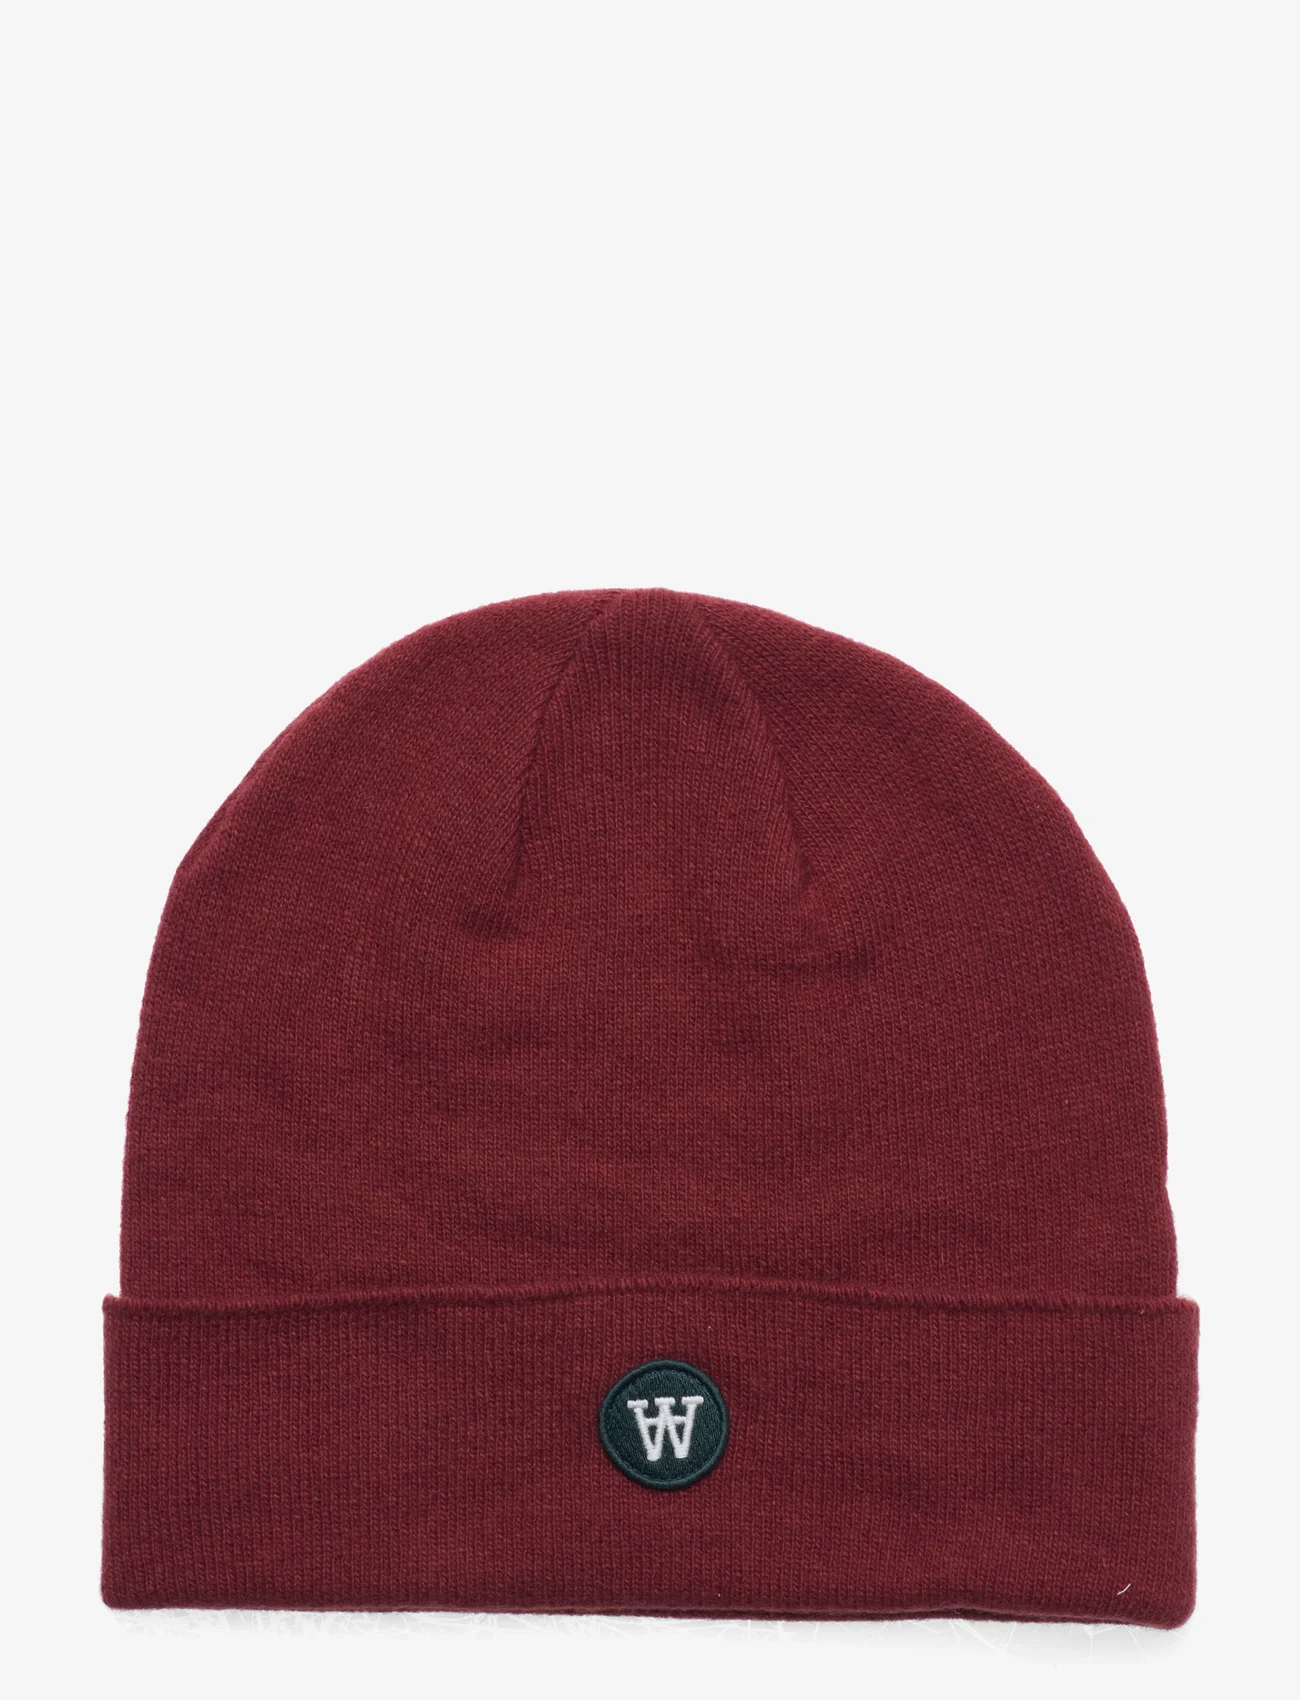 Double A by Wood Wood - Vin patch beanie - kepurės - autumn red - 0